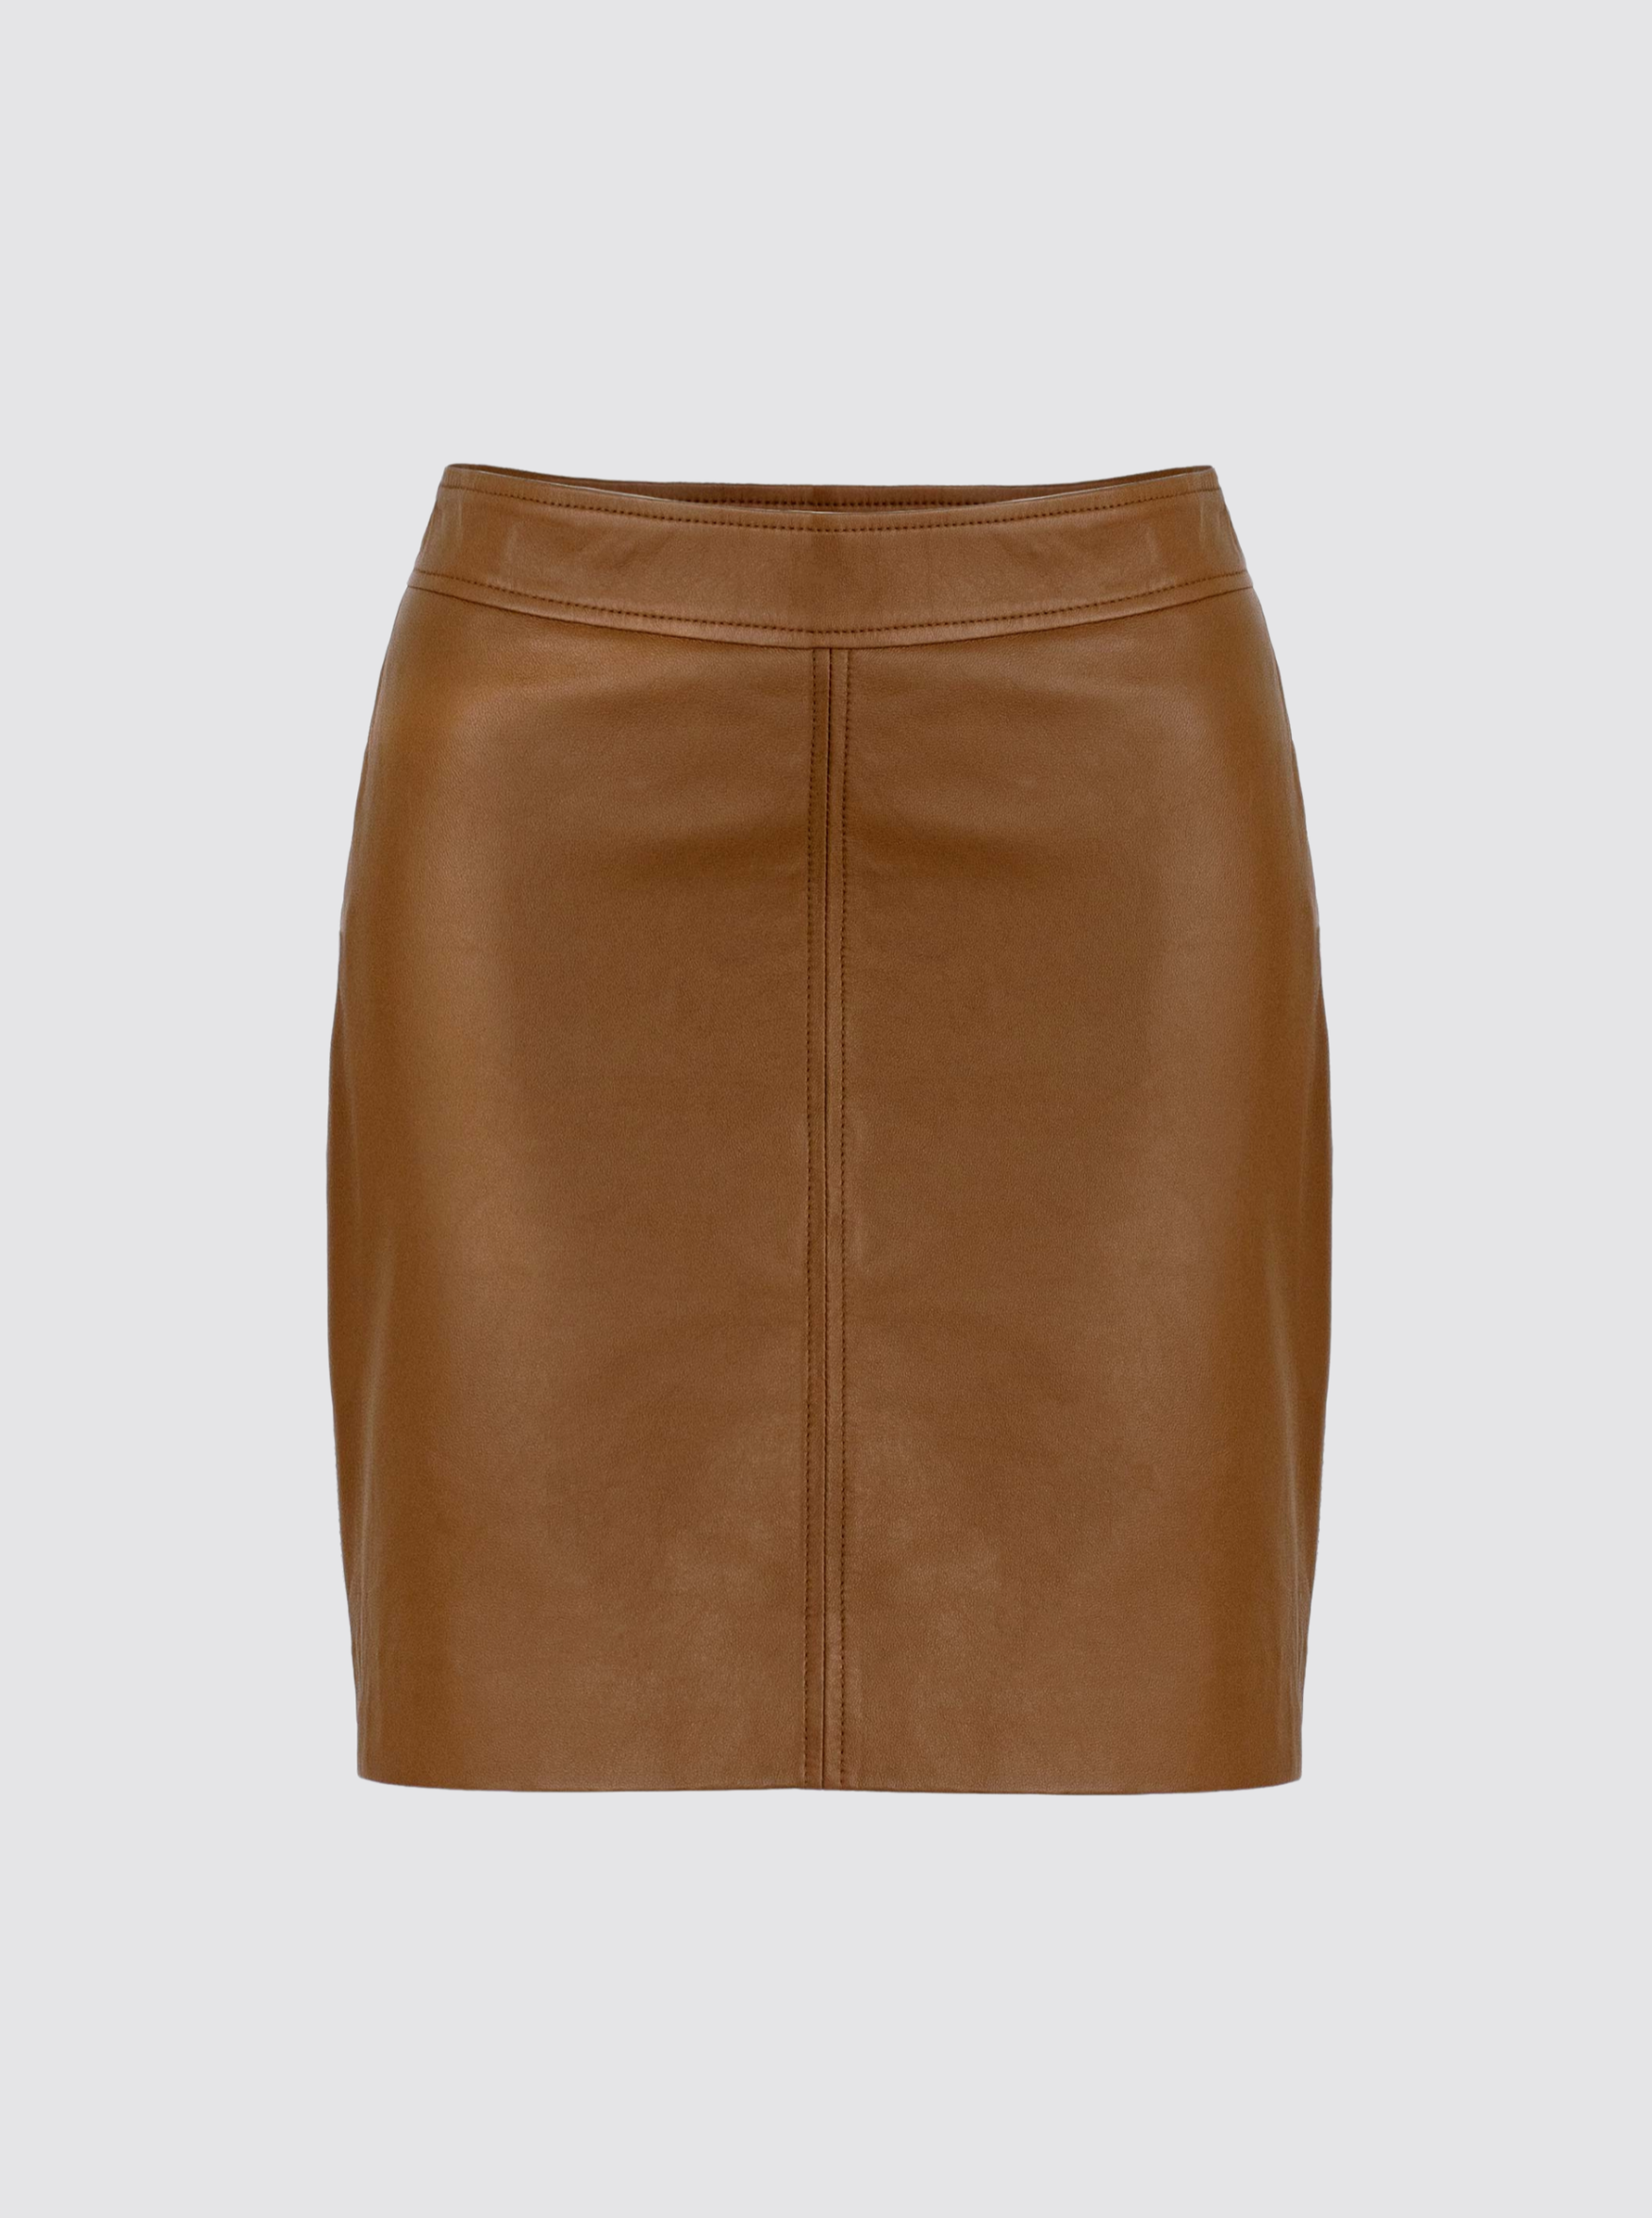 2NDSKIN The Label leather mini skirt in caramel